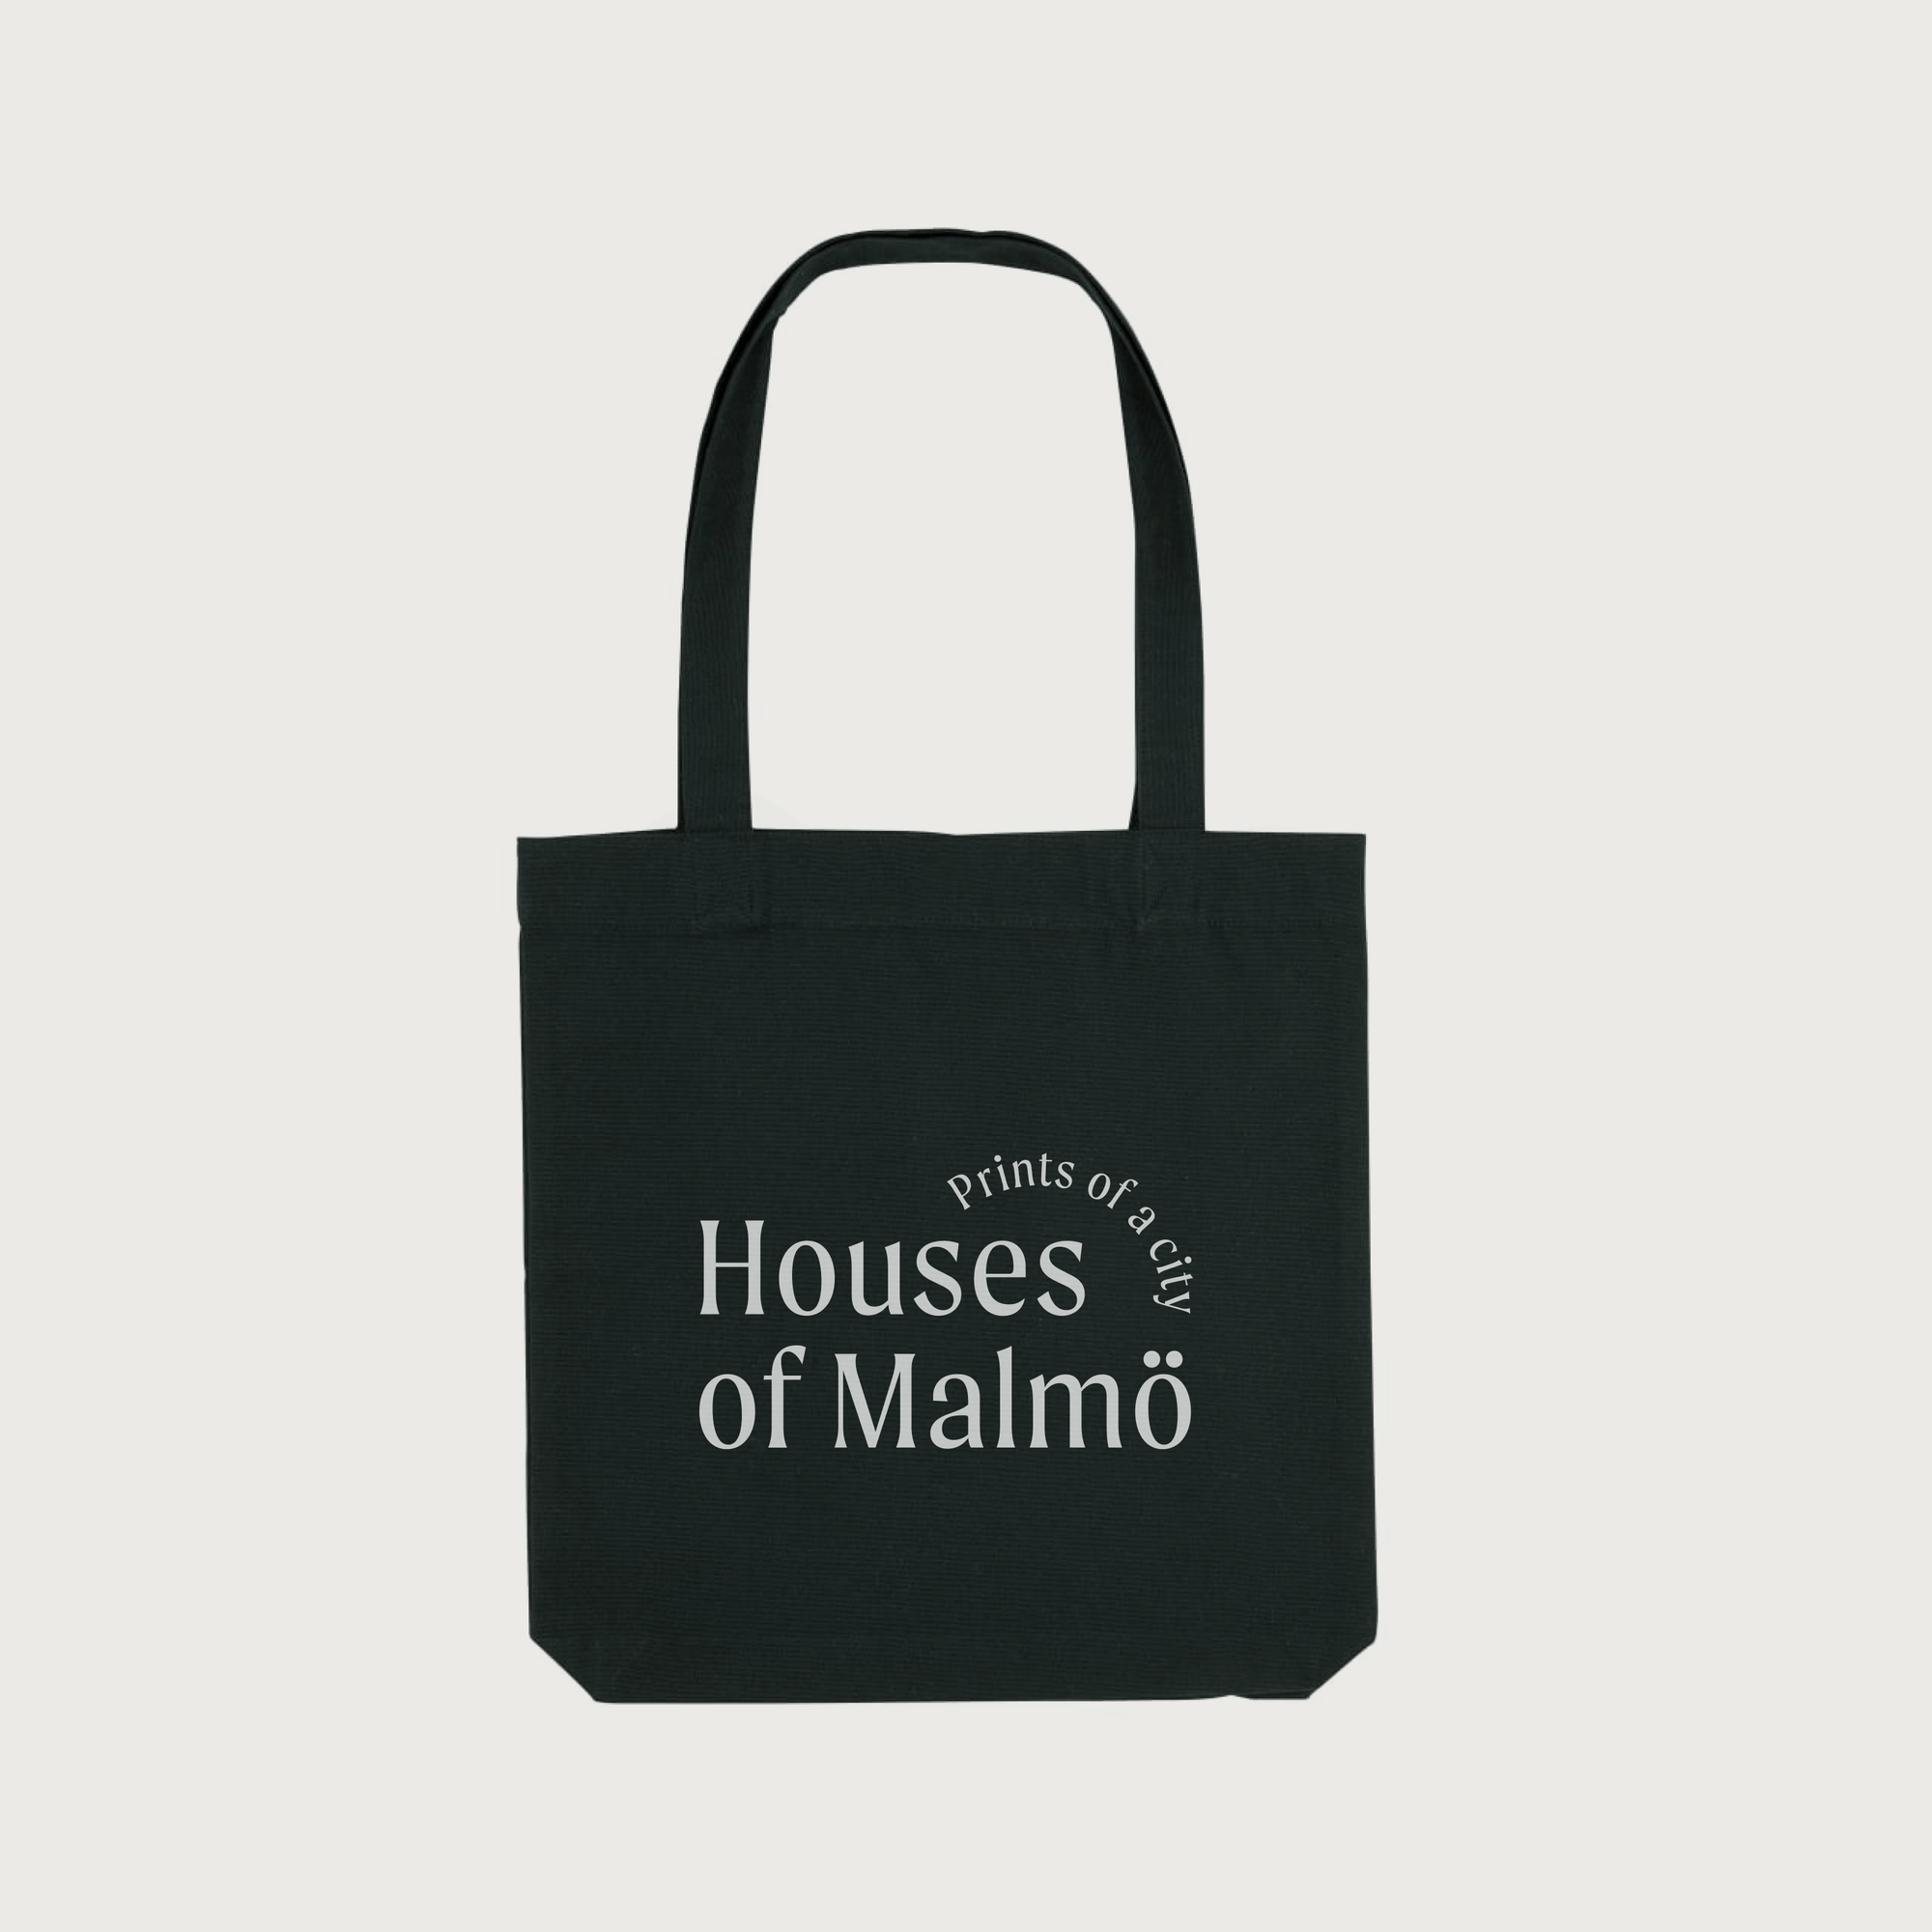 Limited edition totebag (Pre order)